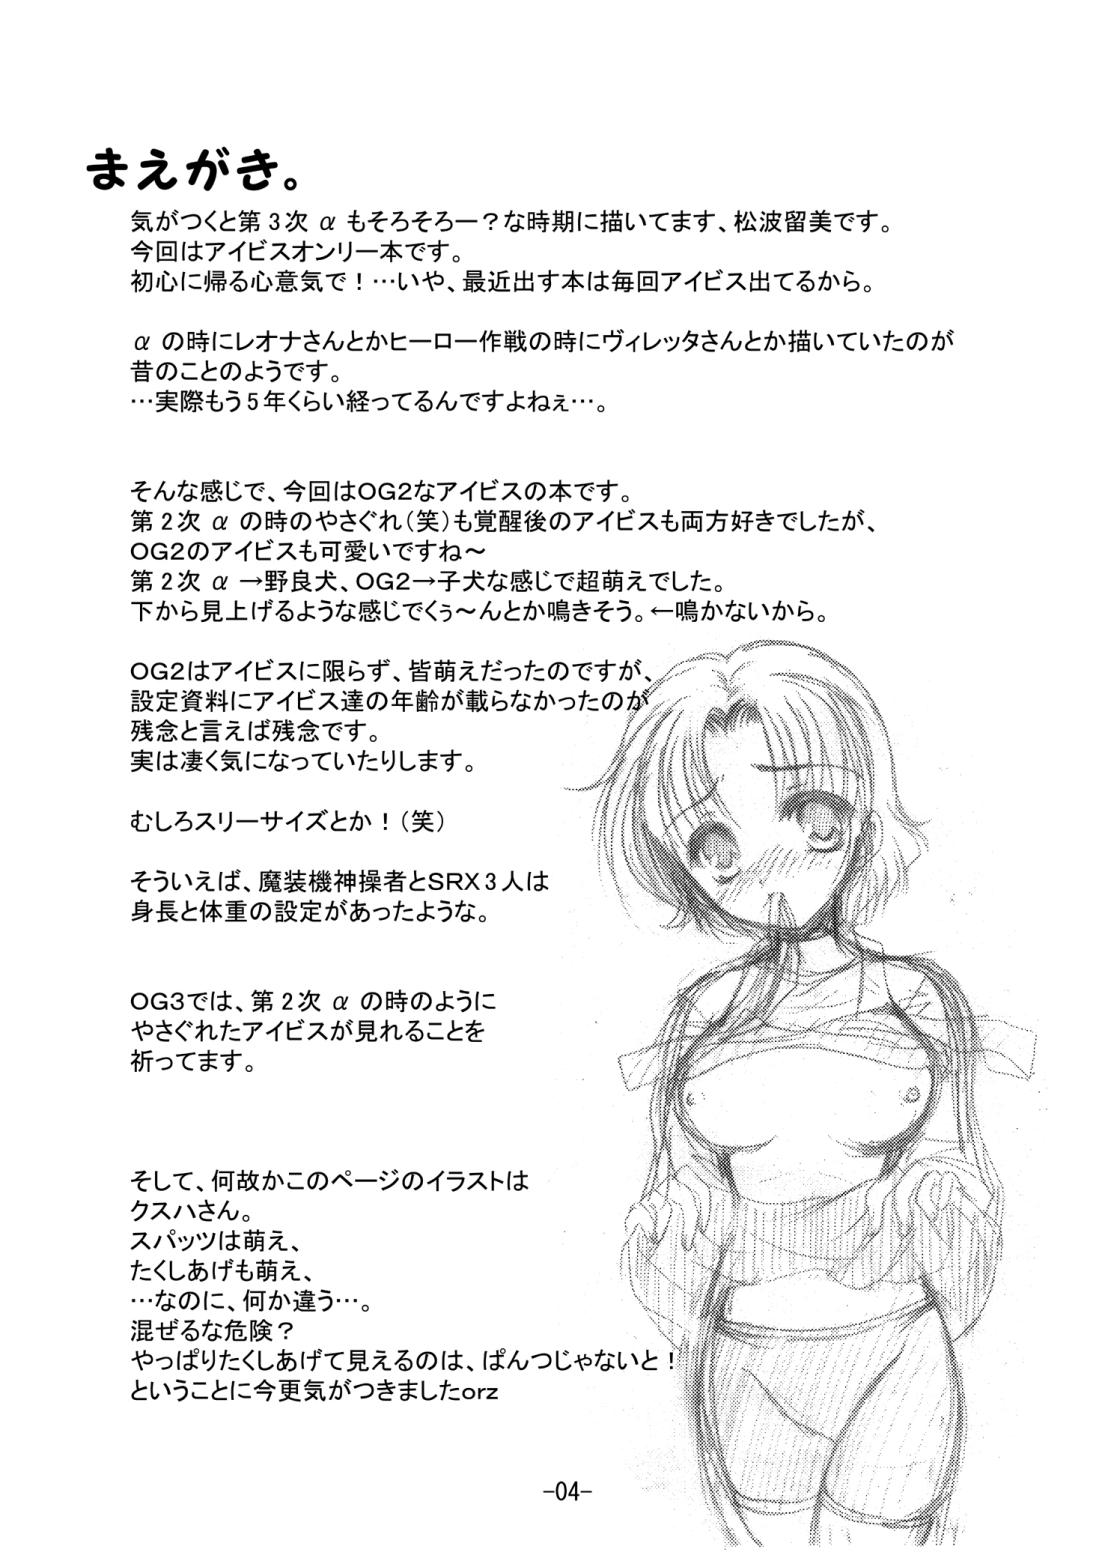 Romance Chief Cake - Super robot wars Farting - Page 3